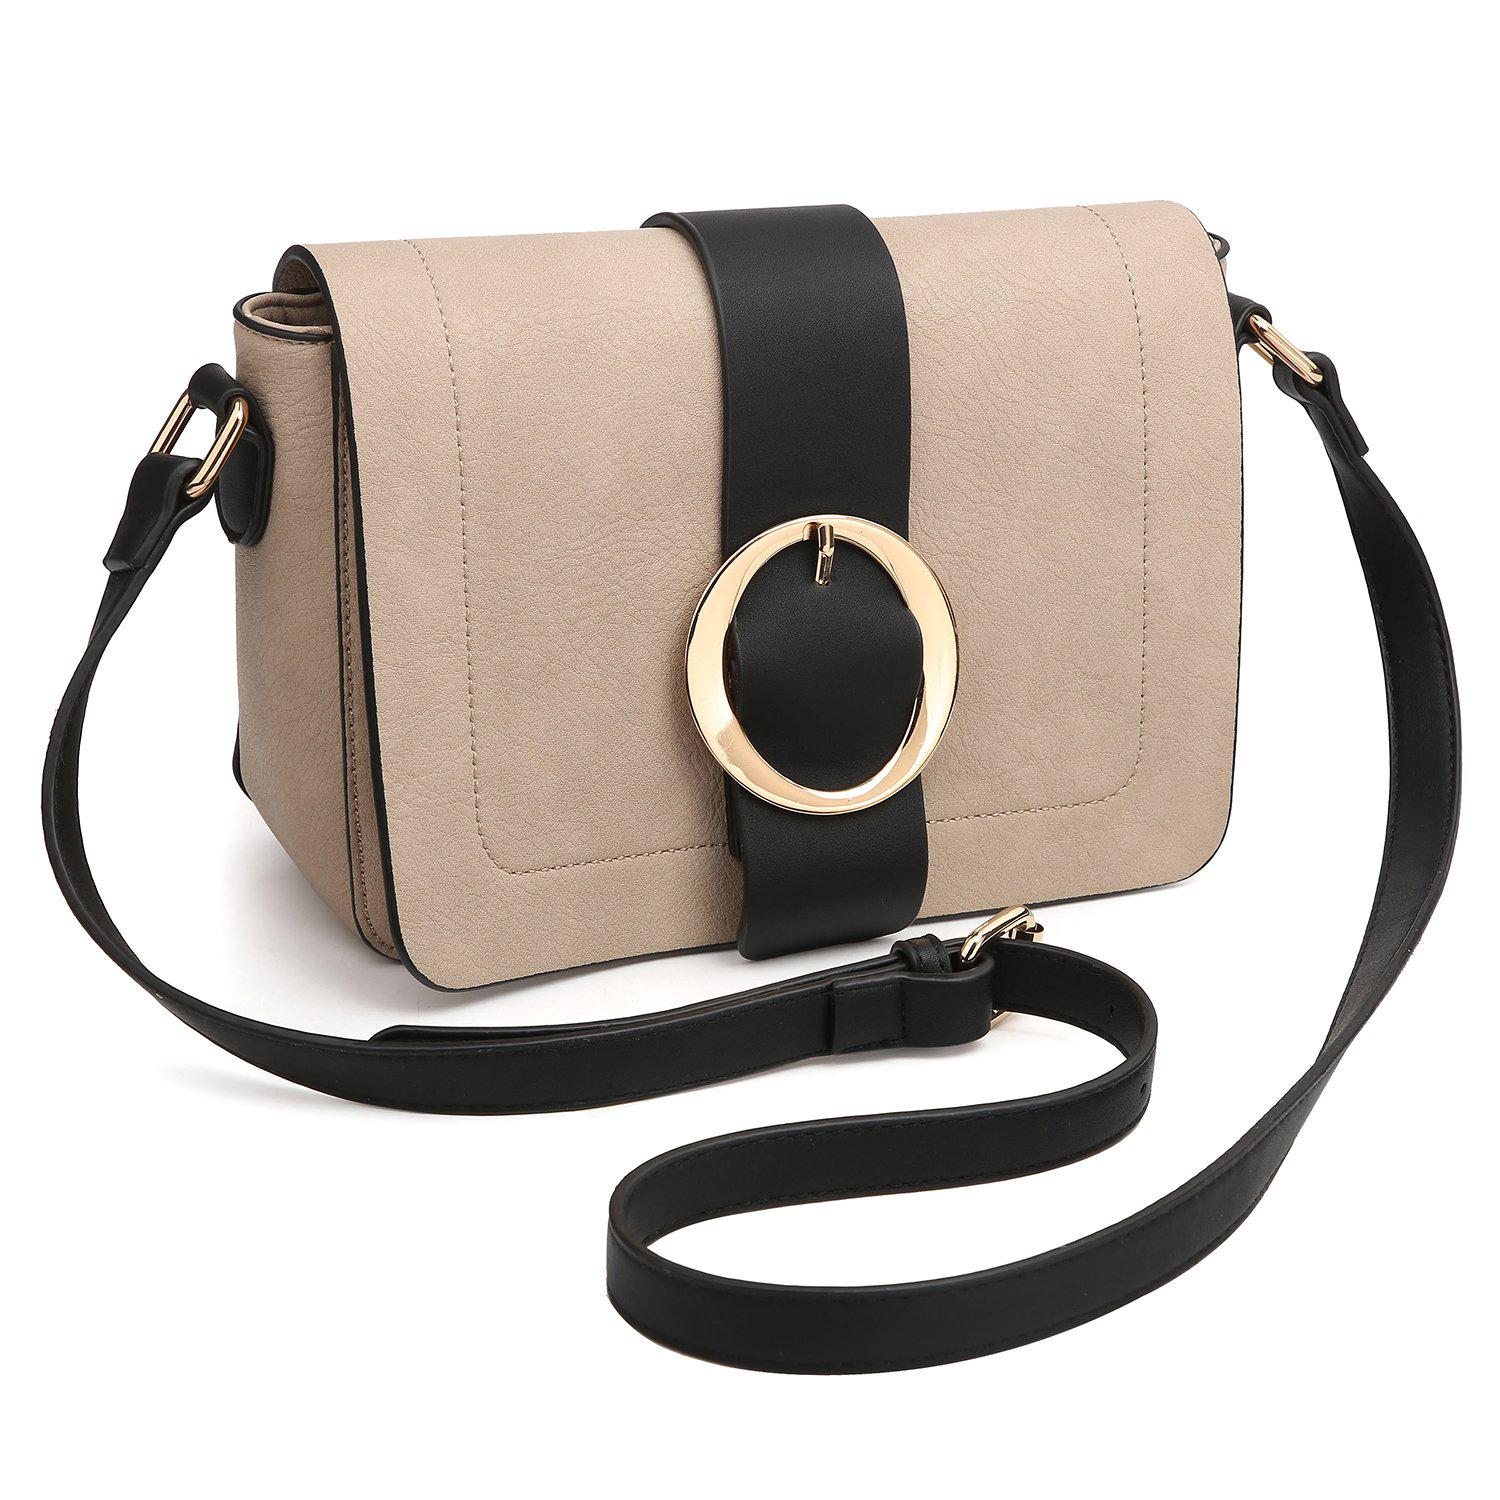 Concise Style Buckle Gold-Tone Ring Crossbody Bag